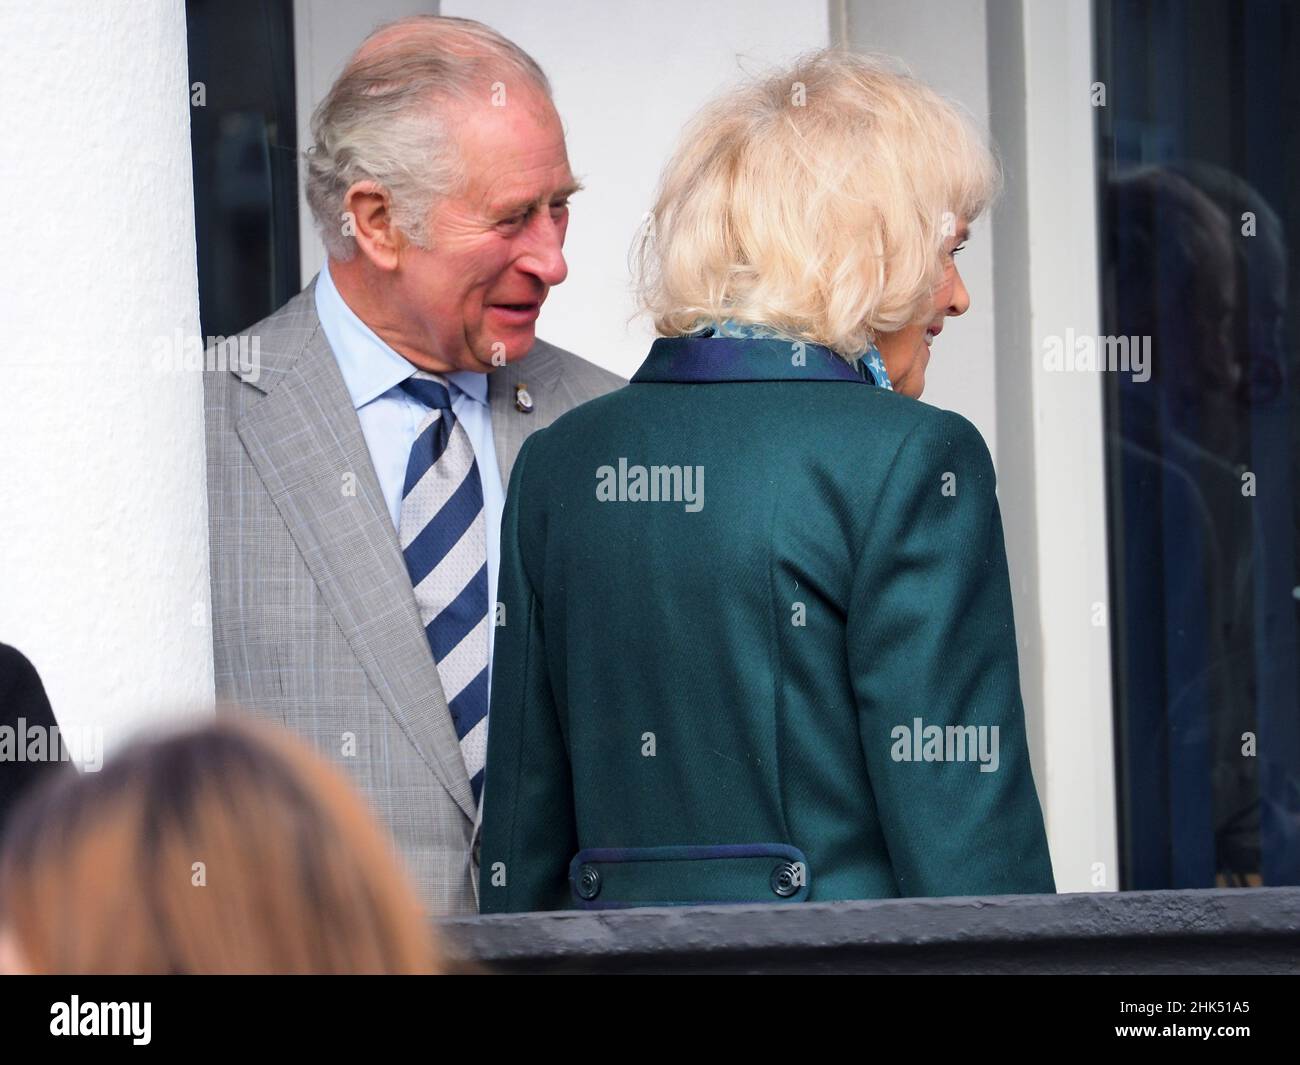 Sheerness, Kent, UK. 2nd Feb, 2022. Prince Charles & Camilla visiting the Sports Centre / Healthy Living Centre in Sheerness, Kent this morning as part of a tour of Kent. They arrived at the Sheerness Healthy Living Centre meeting with staff and volunteers from local charity Sheppey Matters, the 'Isle Connect You' project (tackling loneliness on the Island), a Nordic walking group, and local community radio station Sheppey FM. Credit: James Bell/Alamy Live News Stock Photo